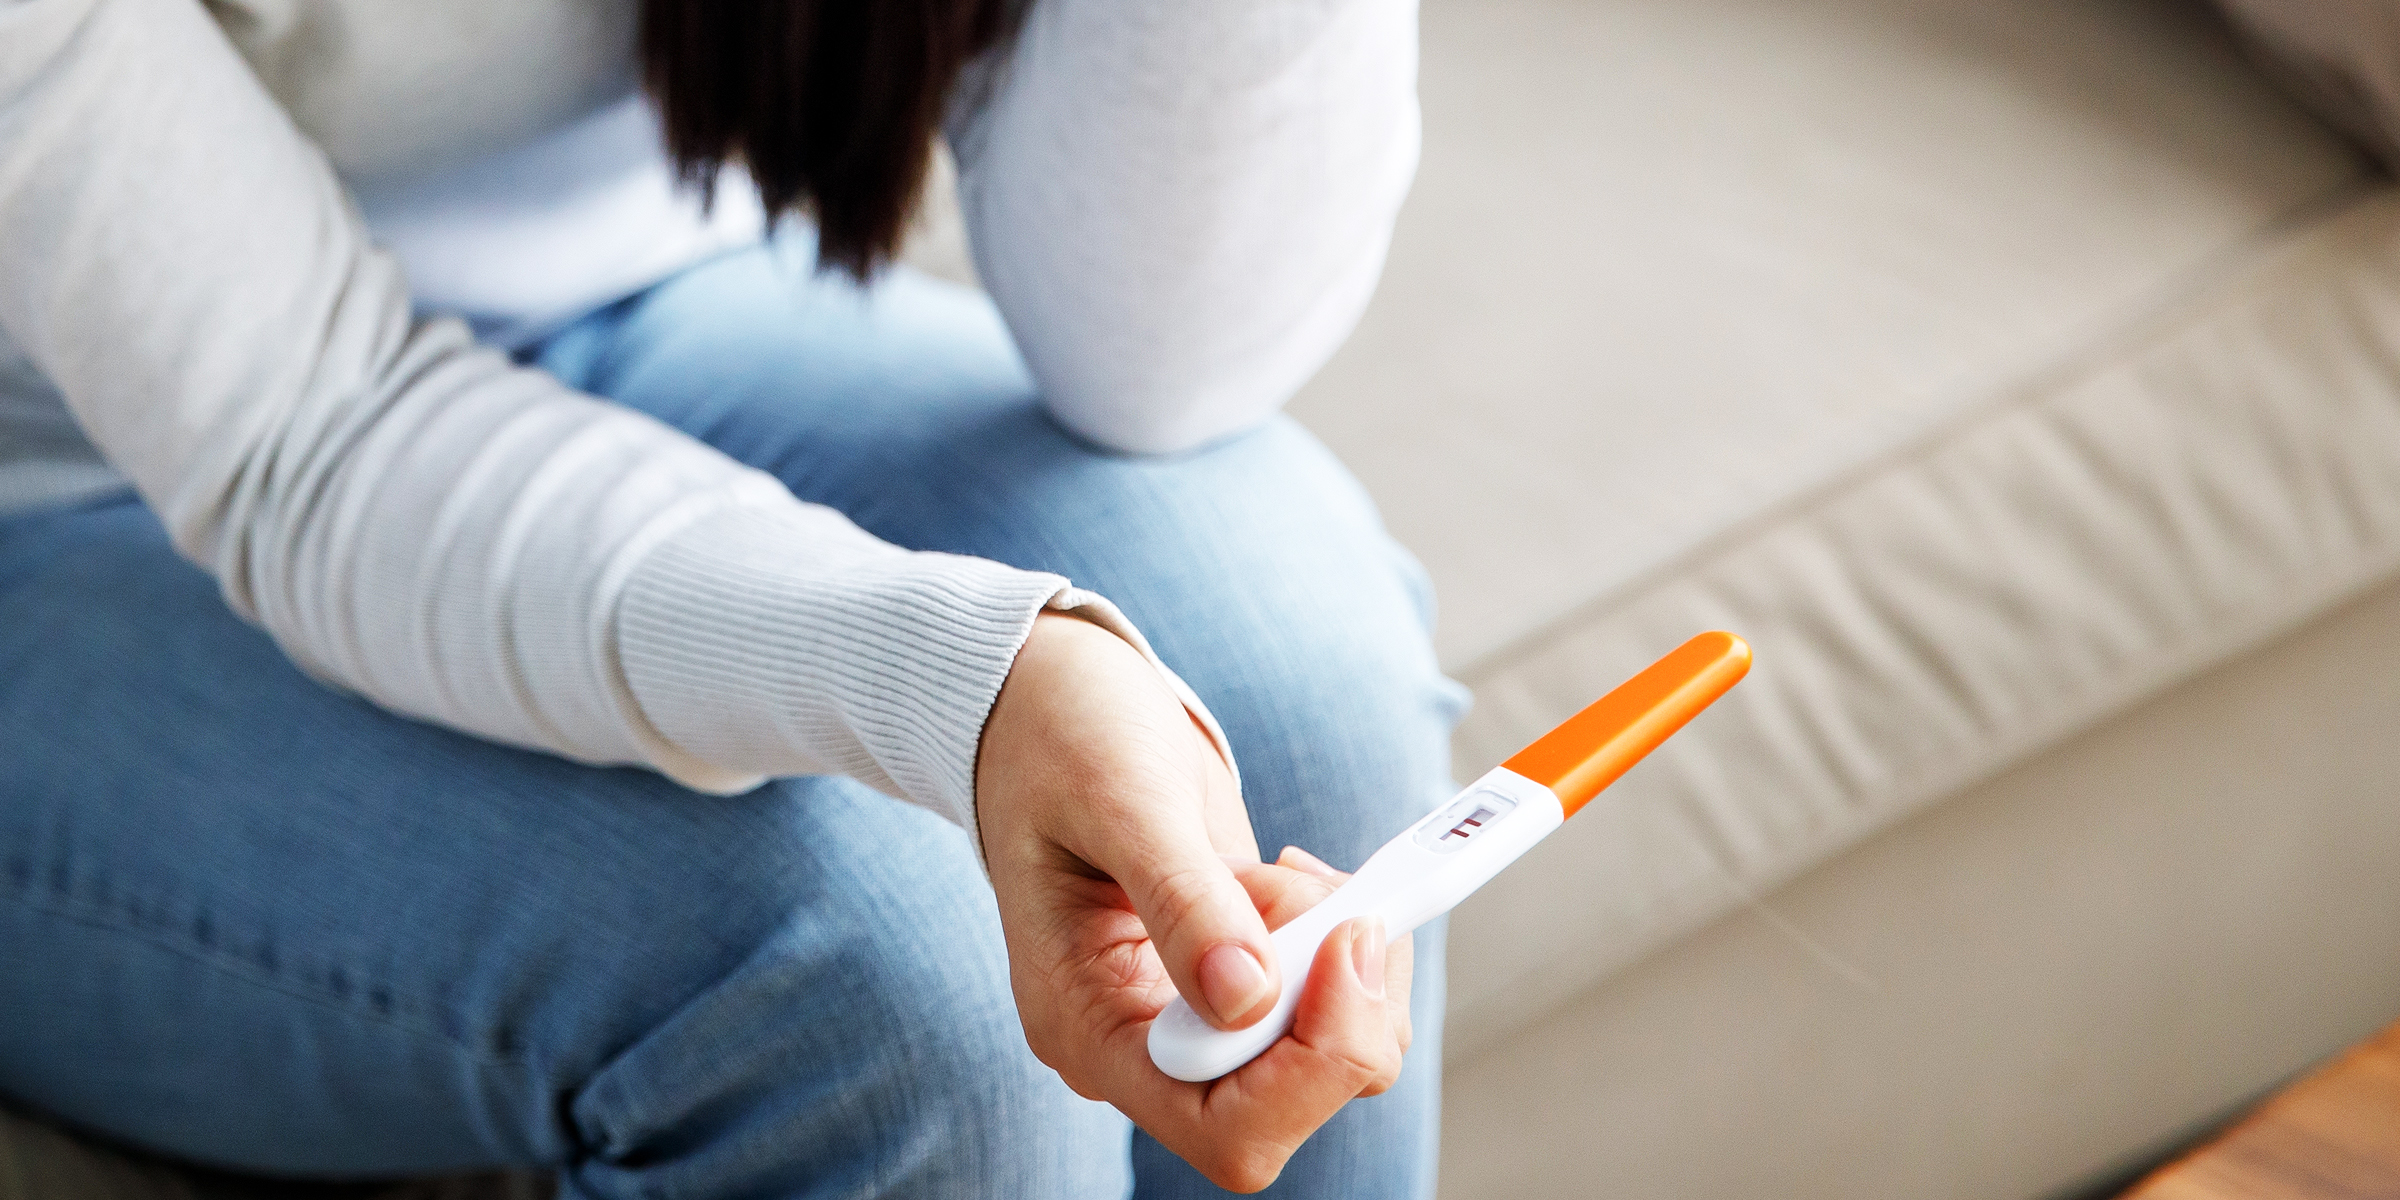 A woman holding a pregnancy test | Source: Shutterstock